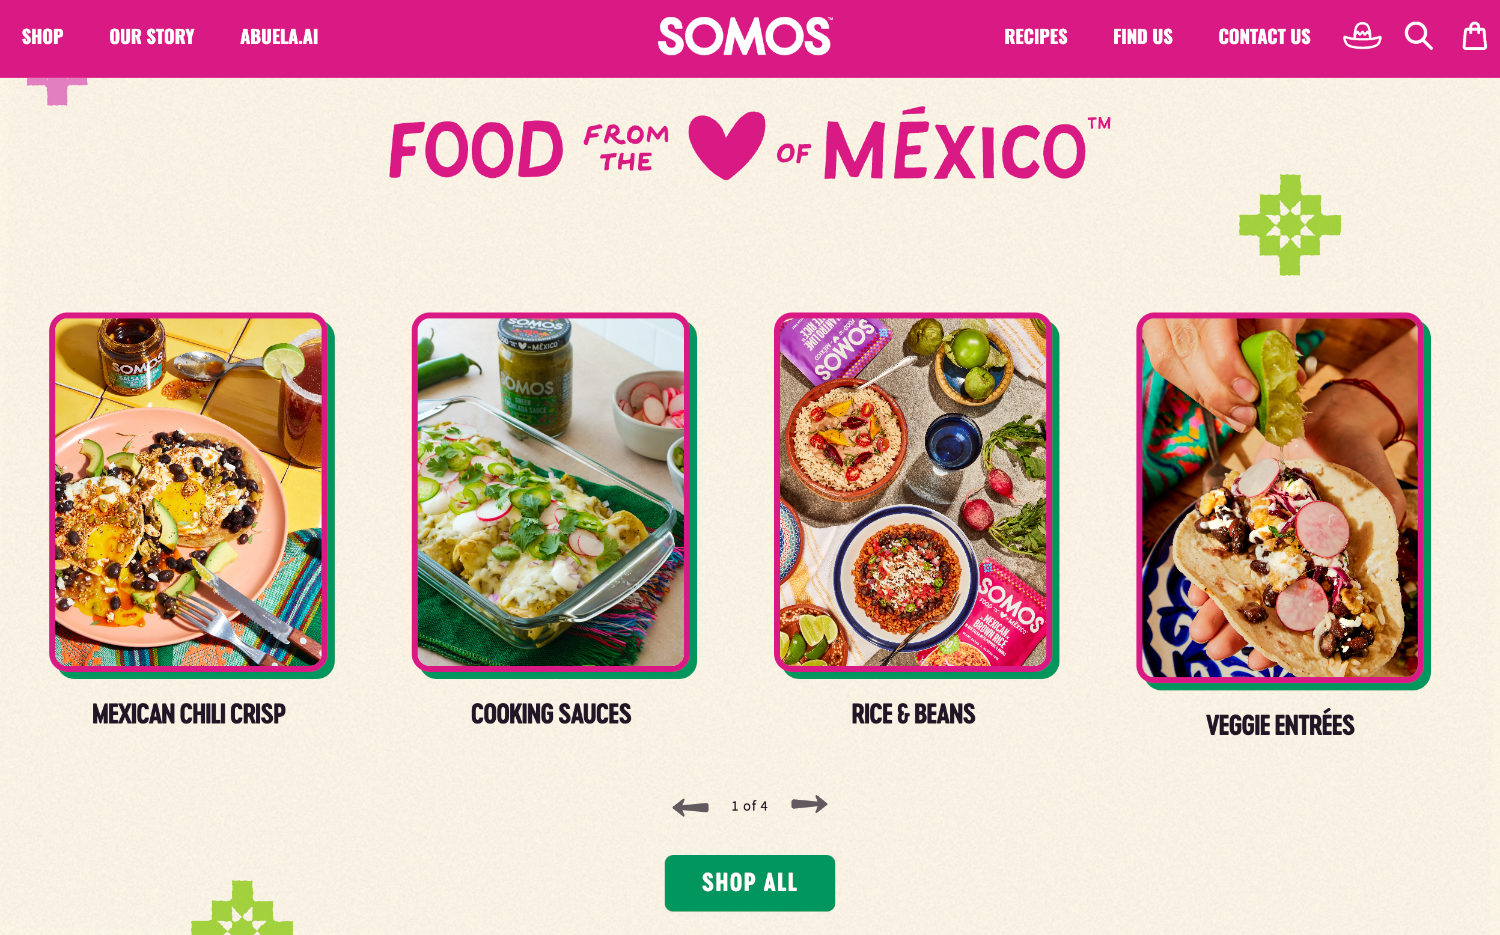 Ecommerce webpage for Somos brand